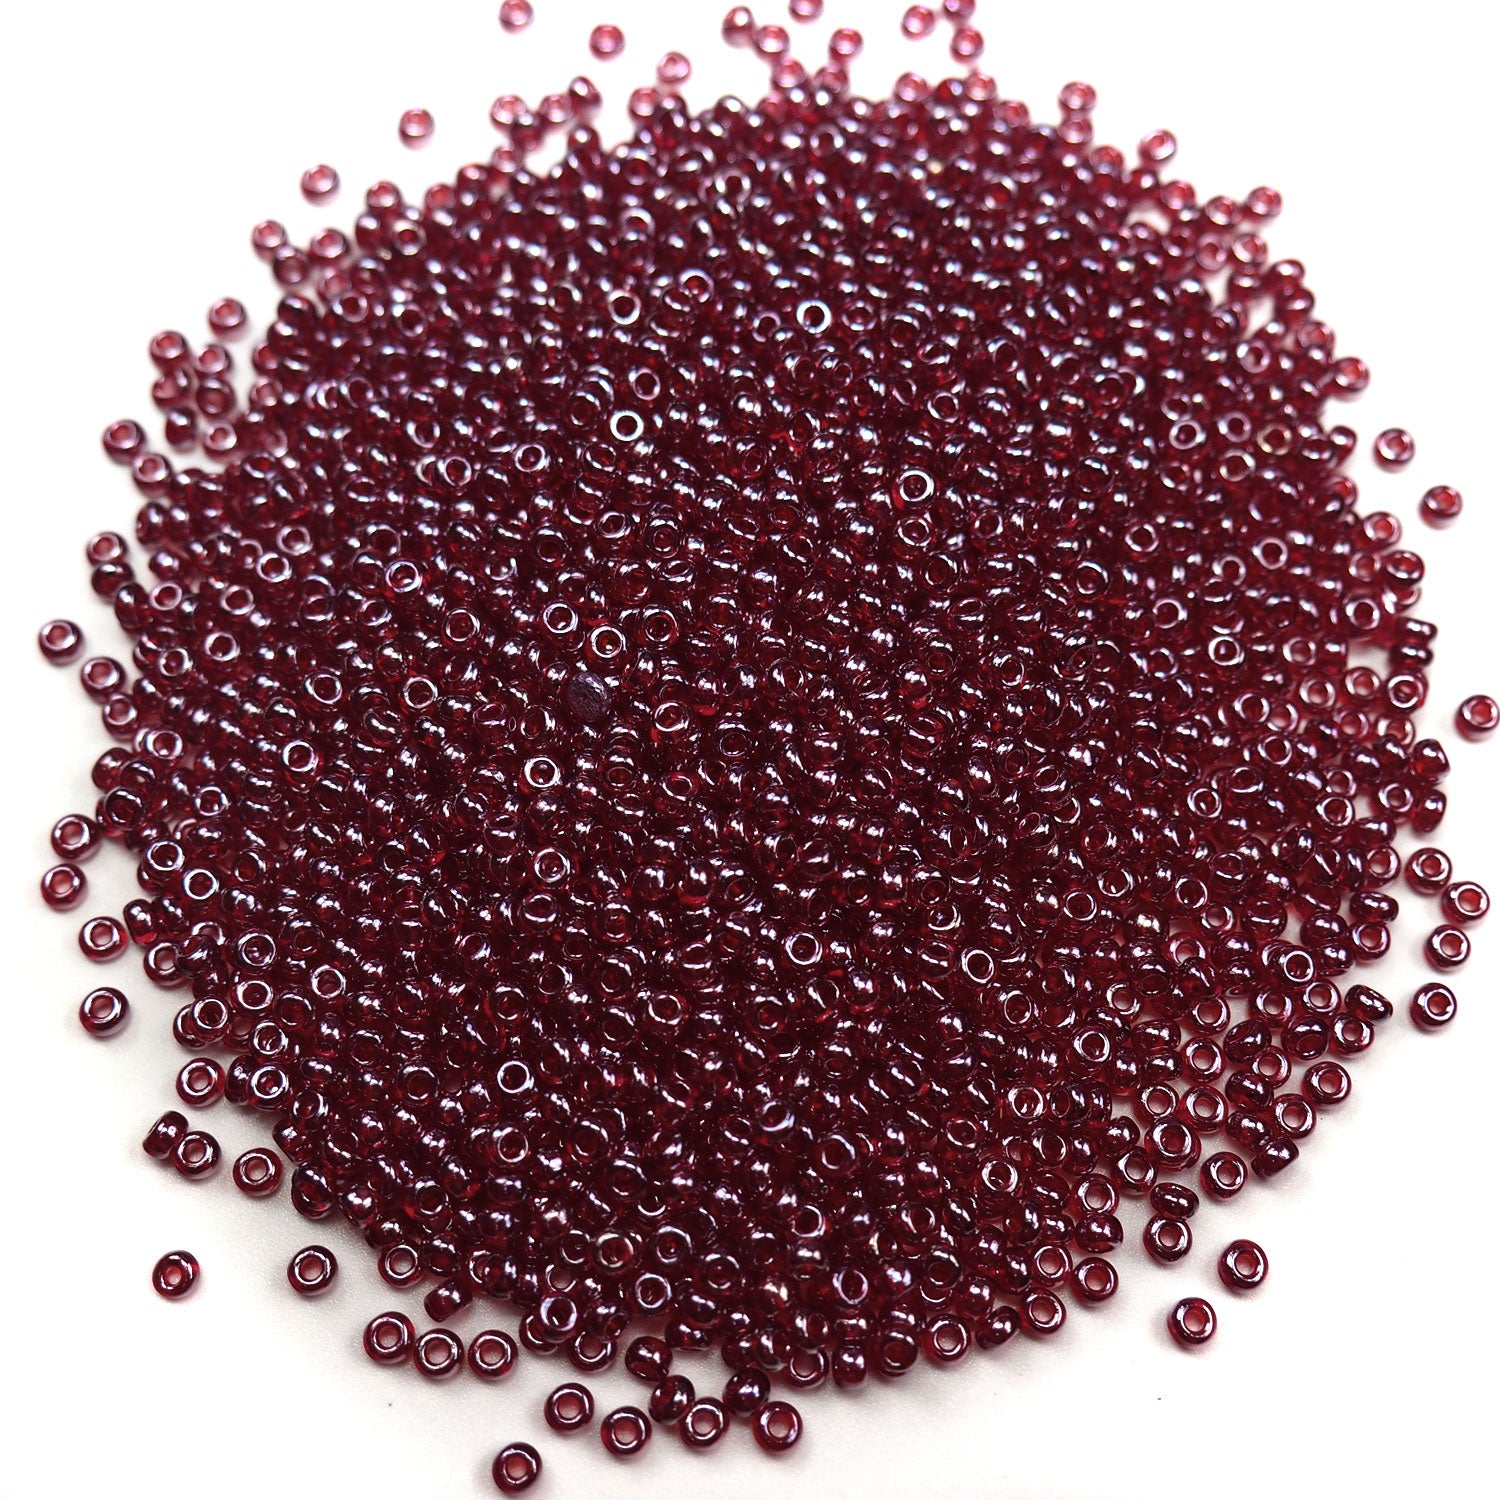 Rocailles size 9/0 (2.6mm) Dark Red Hematite Coated, Preciosa Ornela Traditional Czech Glass Seed Beads, 30grams (1 oz), P925